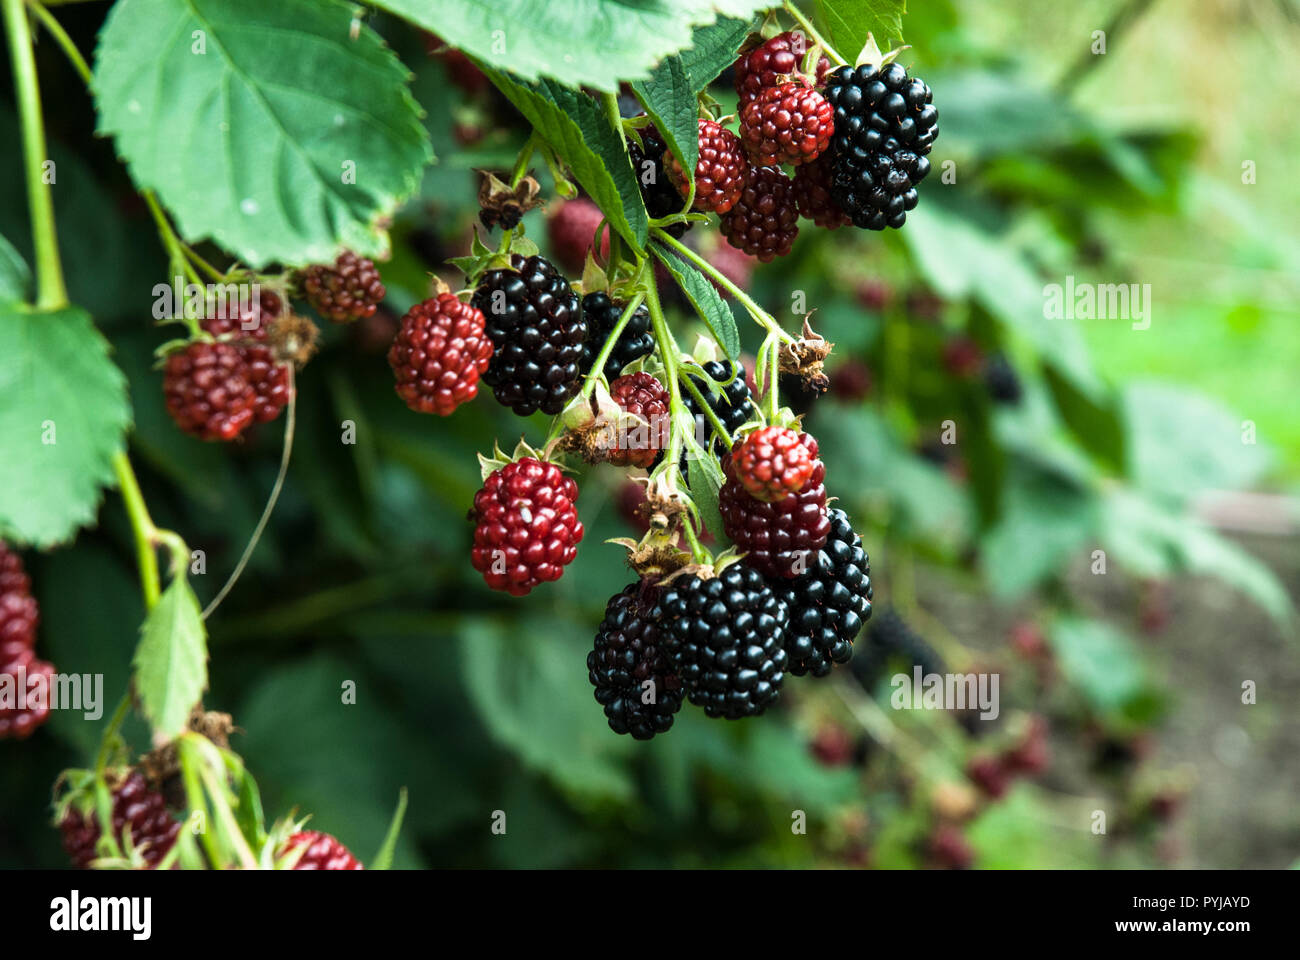 A vibrant sprig of cultivated thornless blackberries with ripe and unripe fruit. Stock Photo